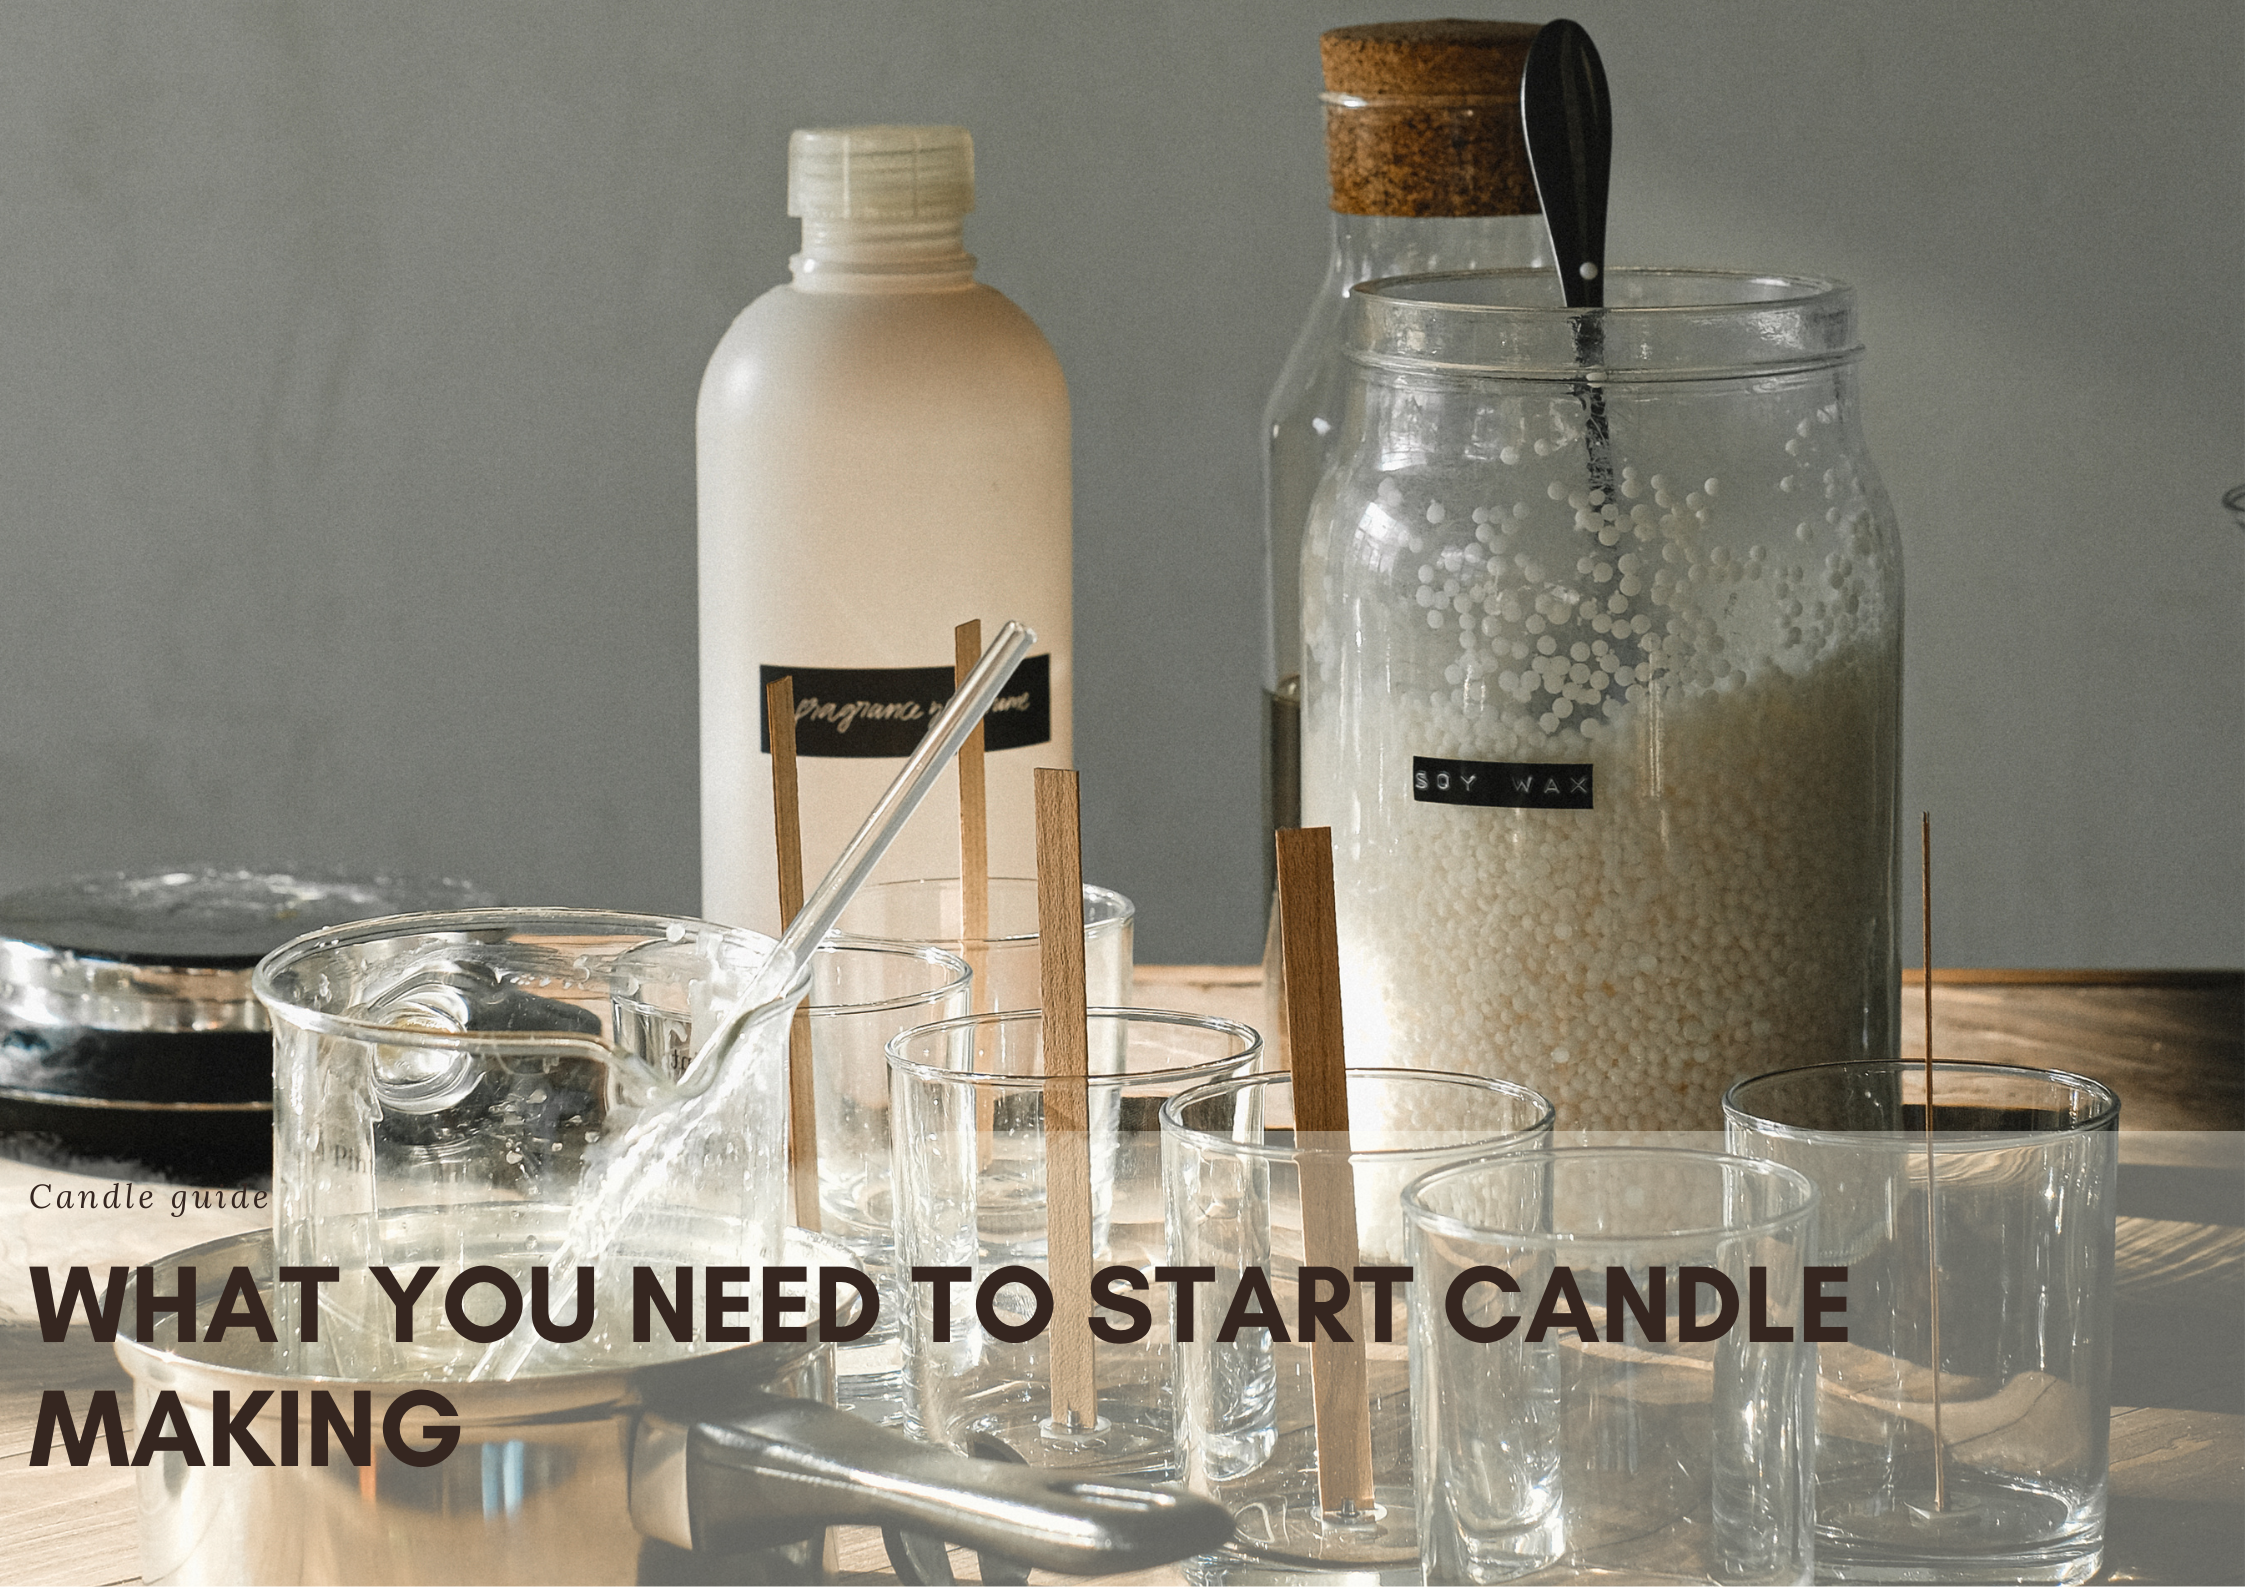 Can A Candle In A Glass Jar Start A Fire? – Suffolk Candles